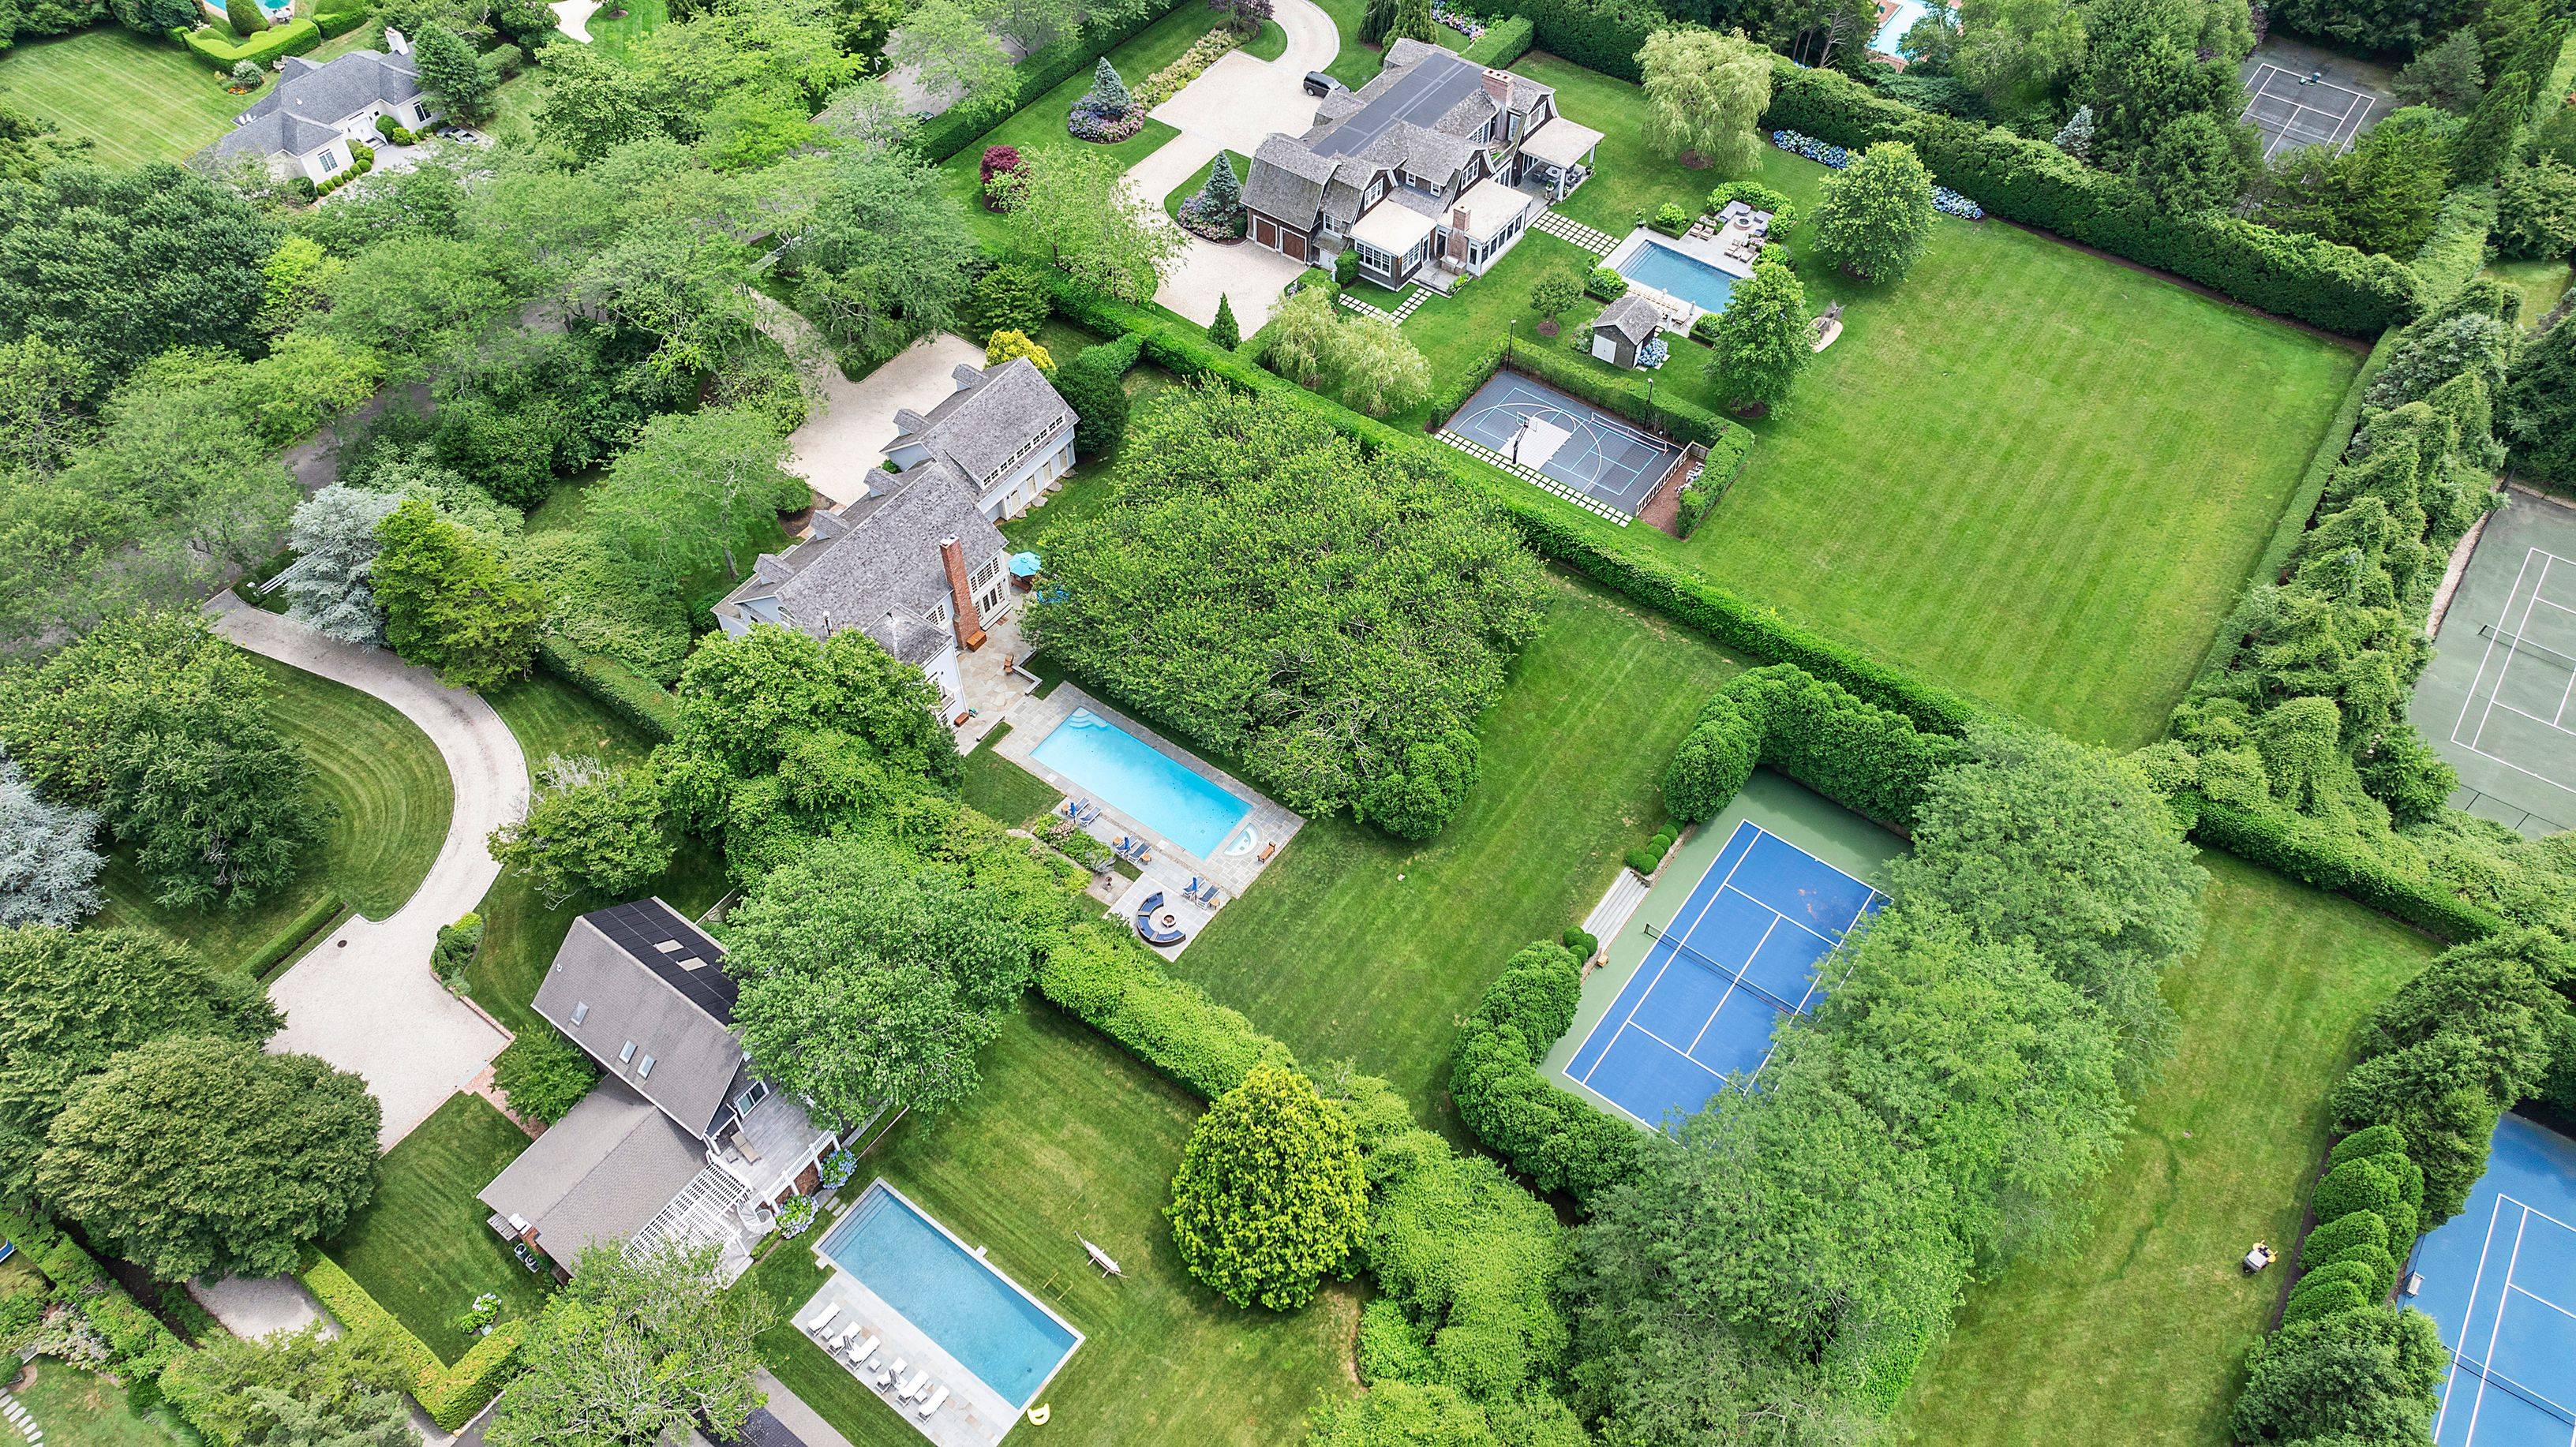 1.6 Acre 5 Bedroom Southampton Village Home with Tennis